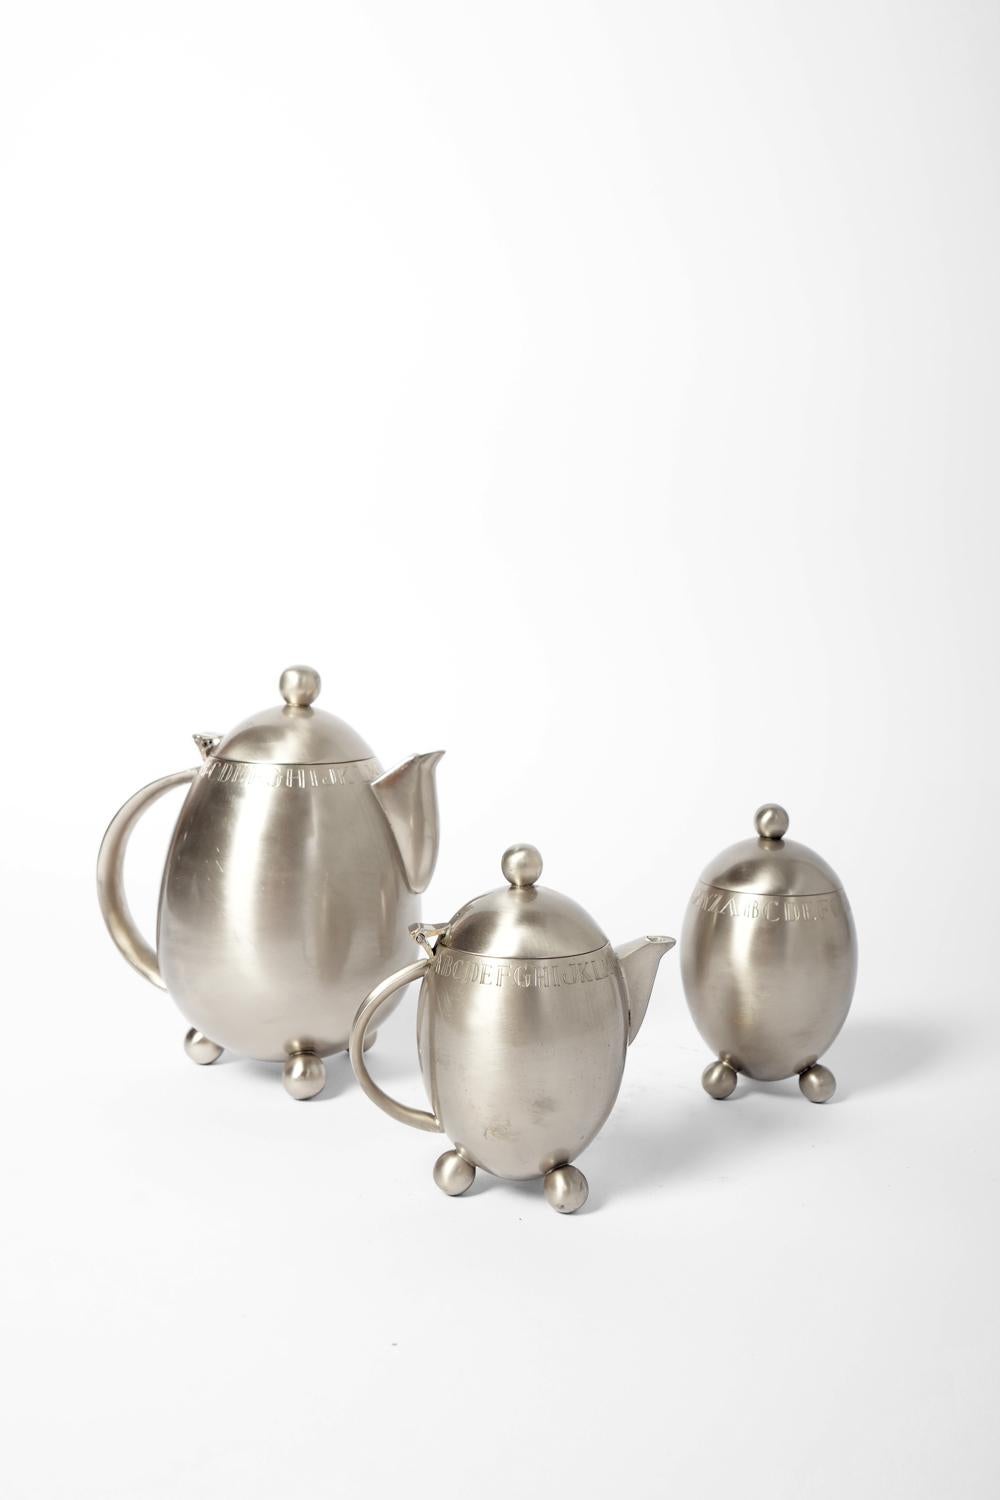 Modernist silver-plated tea service comprising a teapot, a milk jug, a sugar bowl and six cups, with engraved decoration of the letters of the alphabet around the neck. France, 1910s. 

Teapot dimensions as main reference.